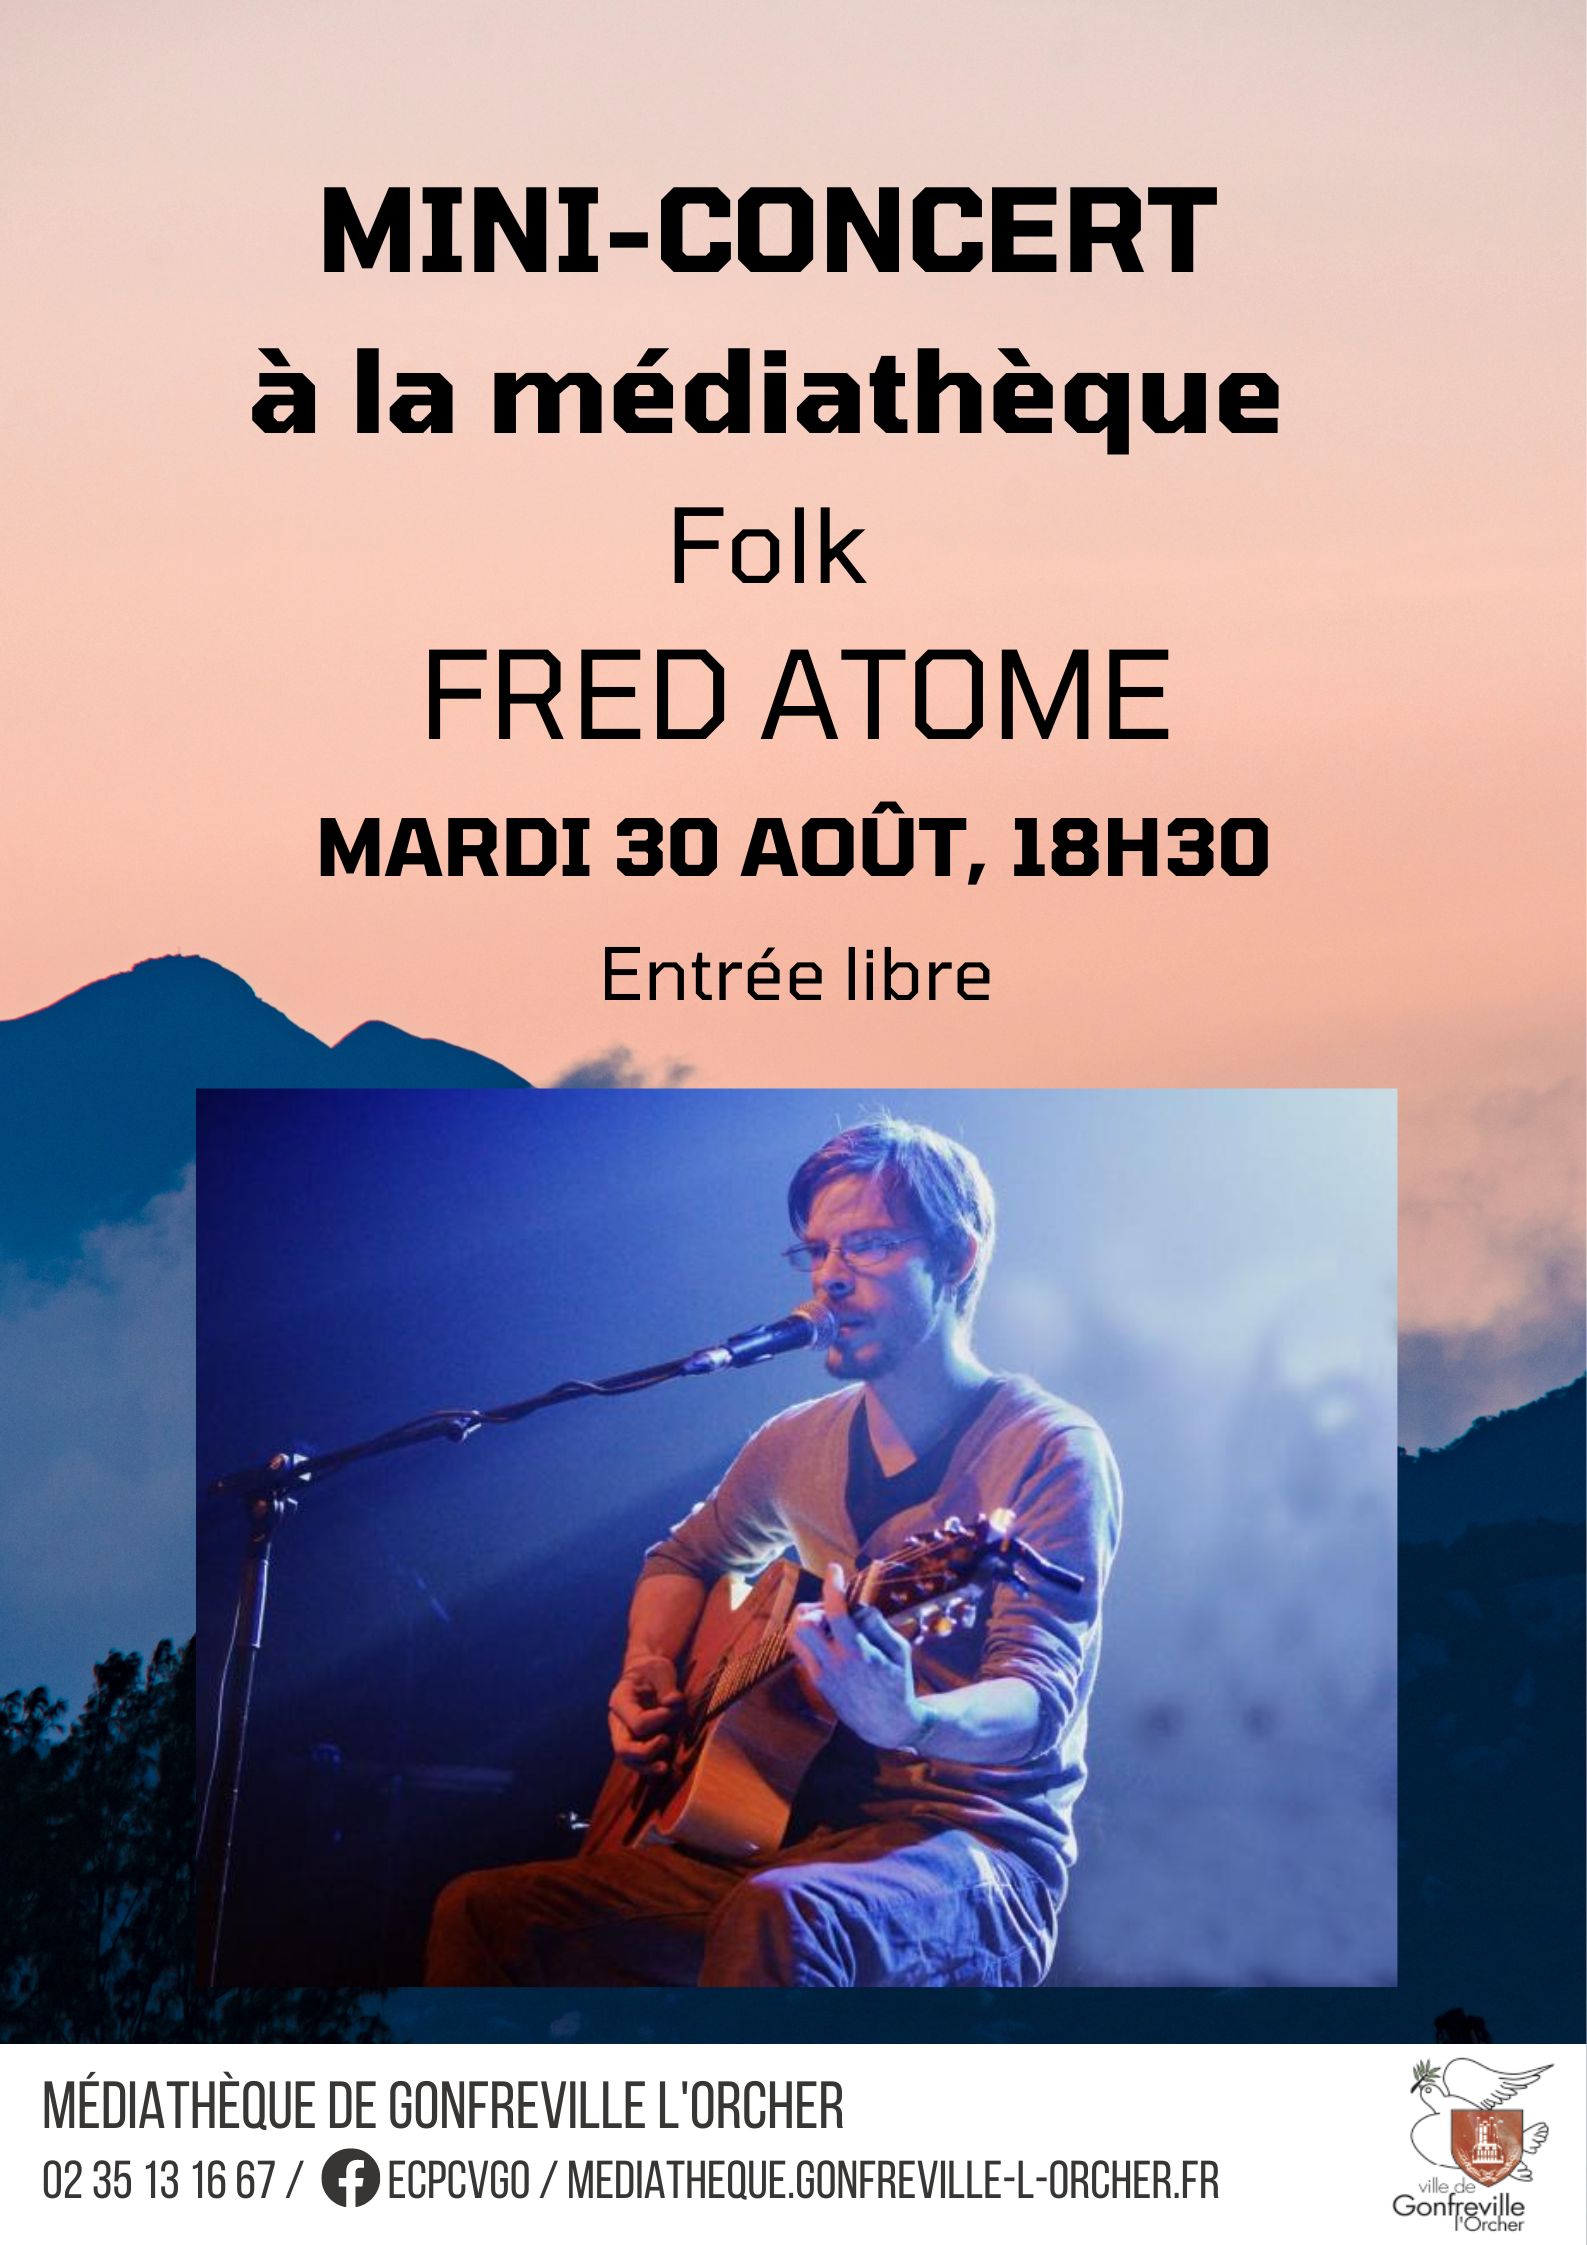 Fred Atome